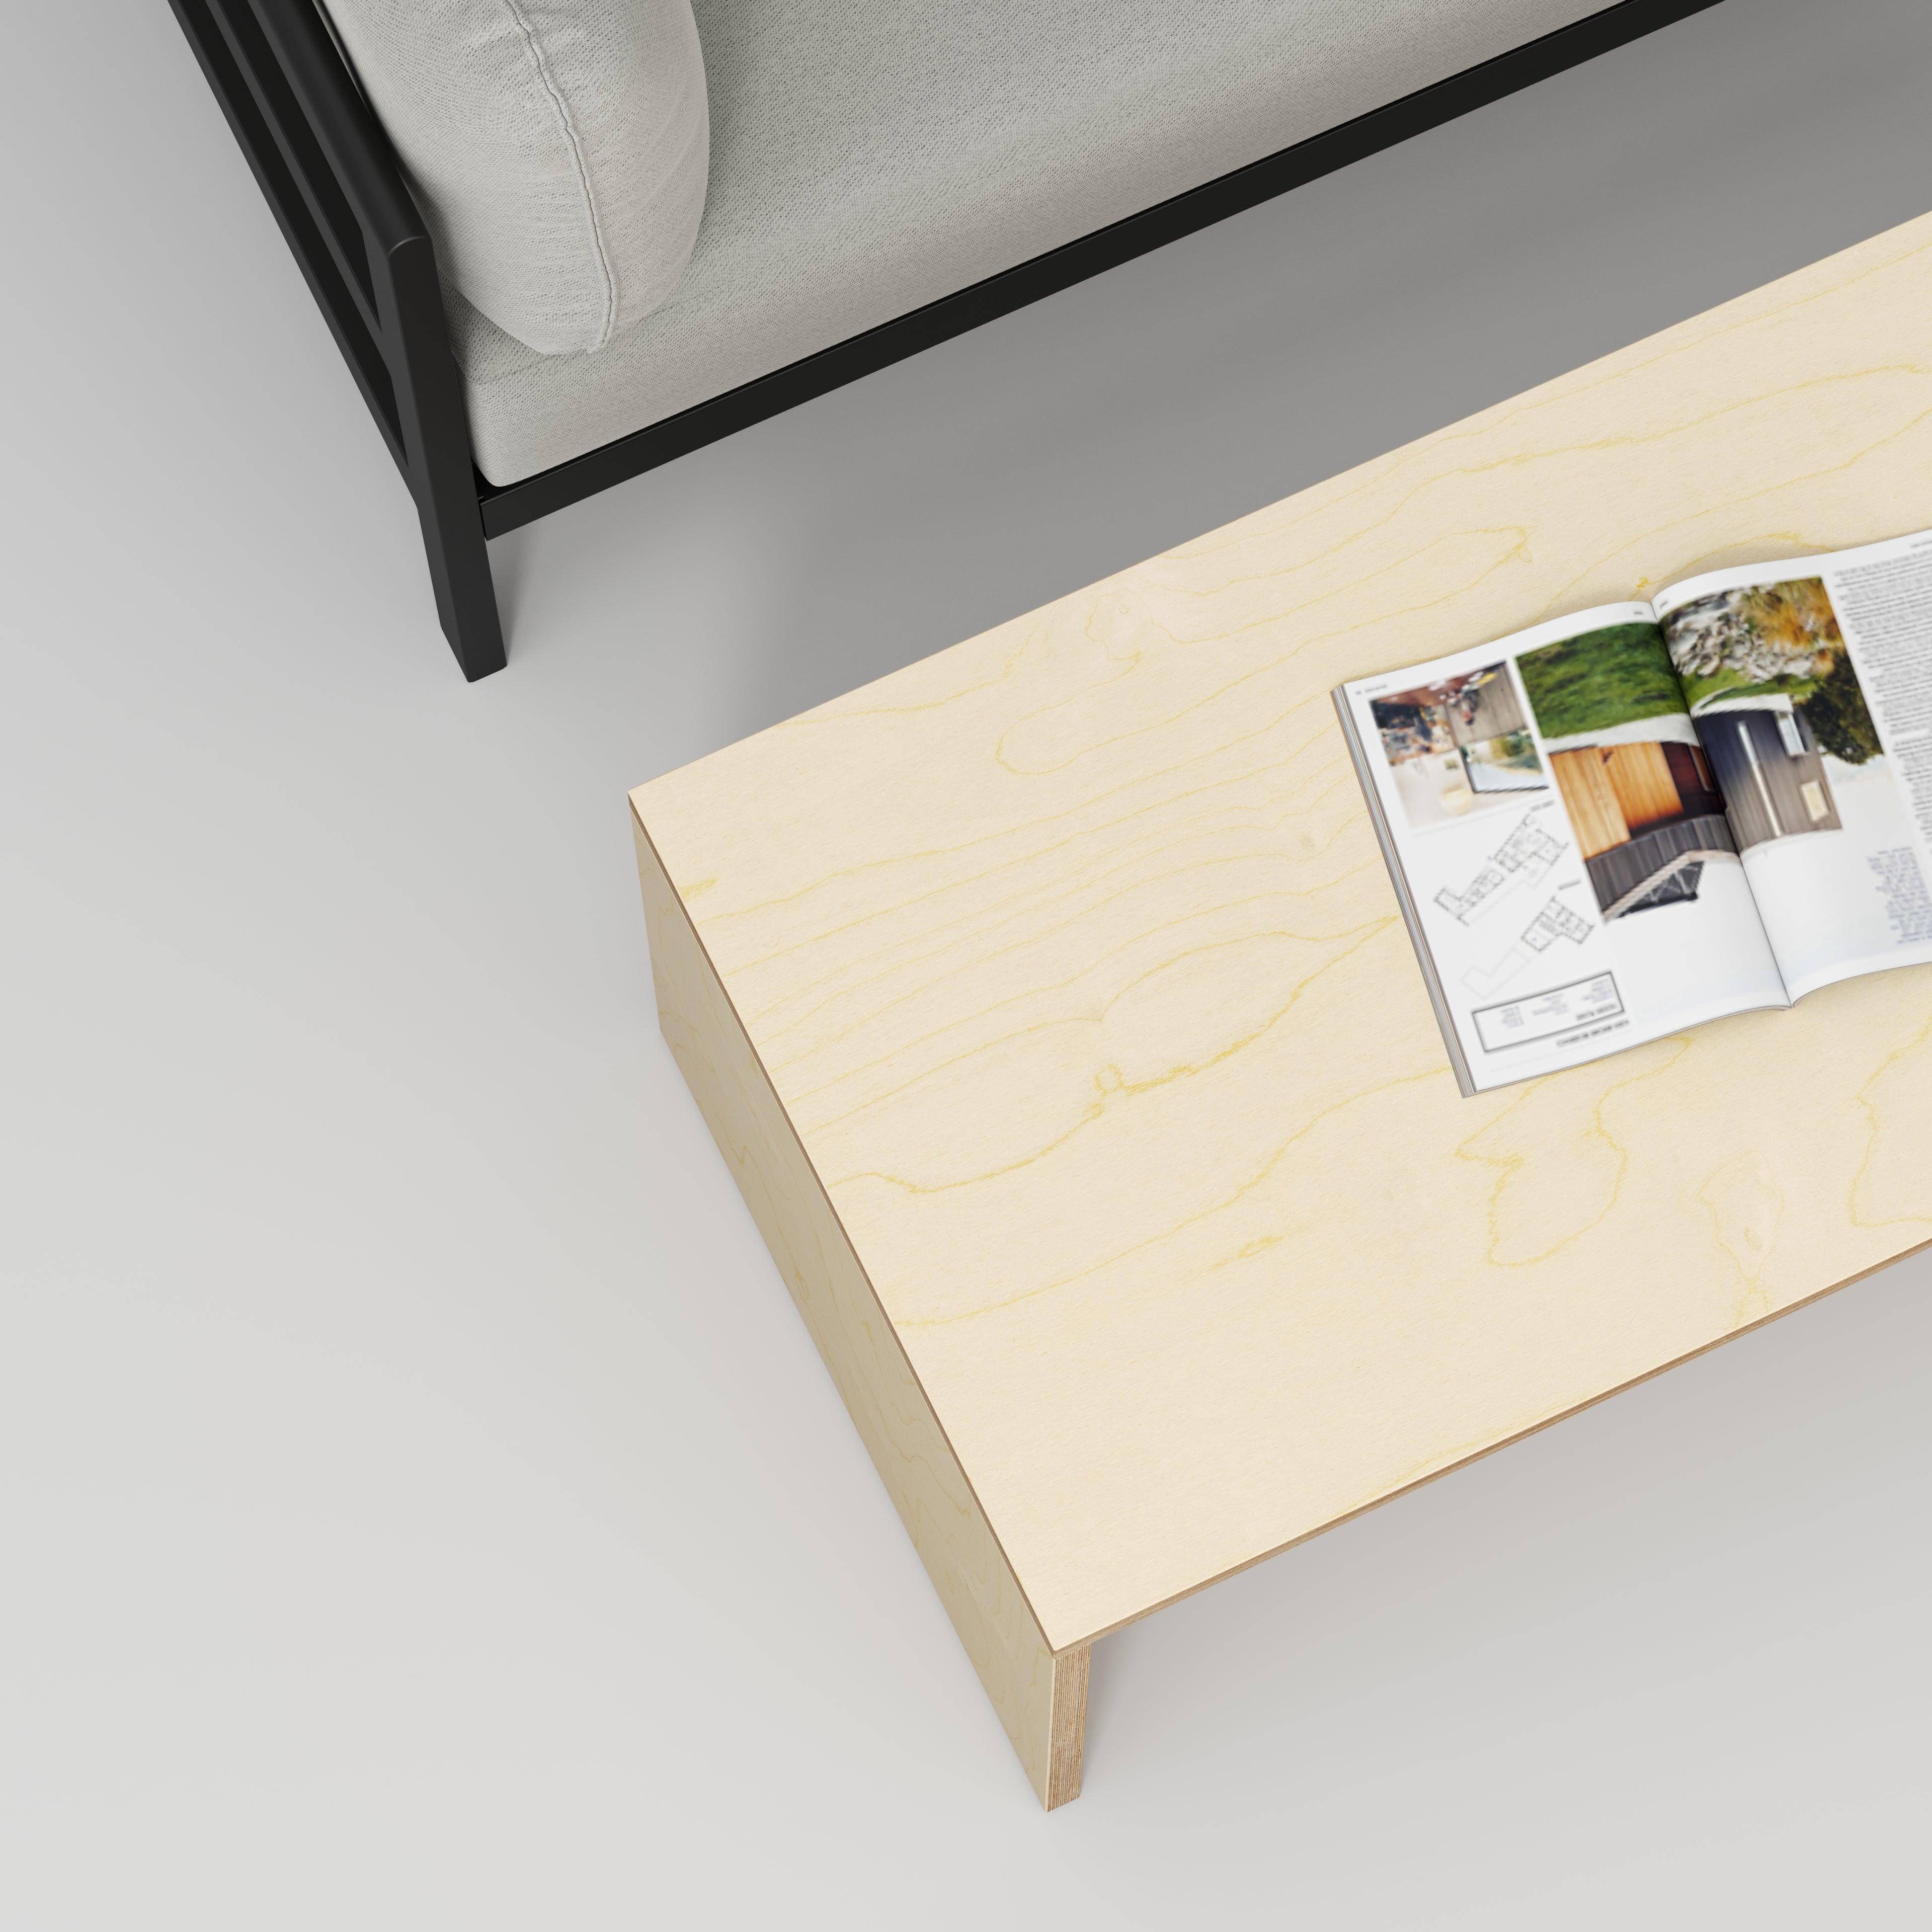 Coffee Table with Solid Sides - Plywood Birch - 1200(w) x 600(d) x 450(h)